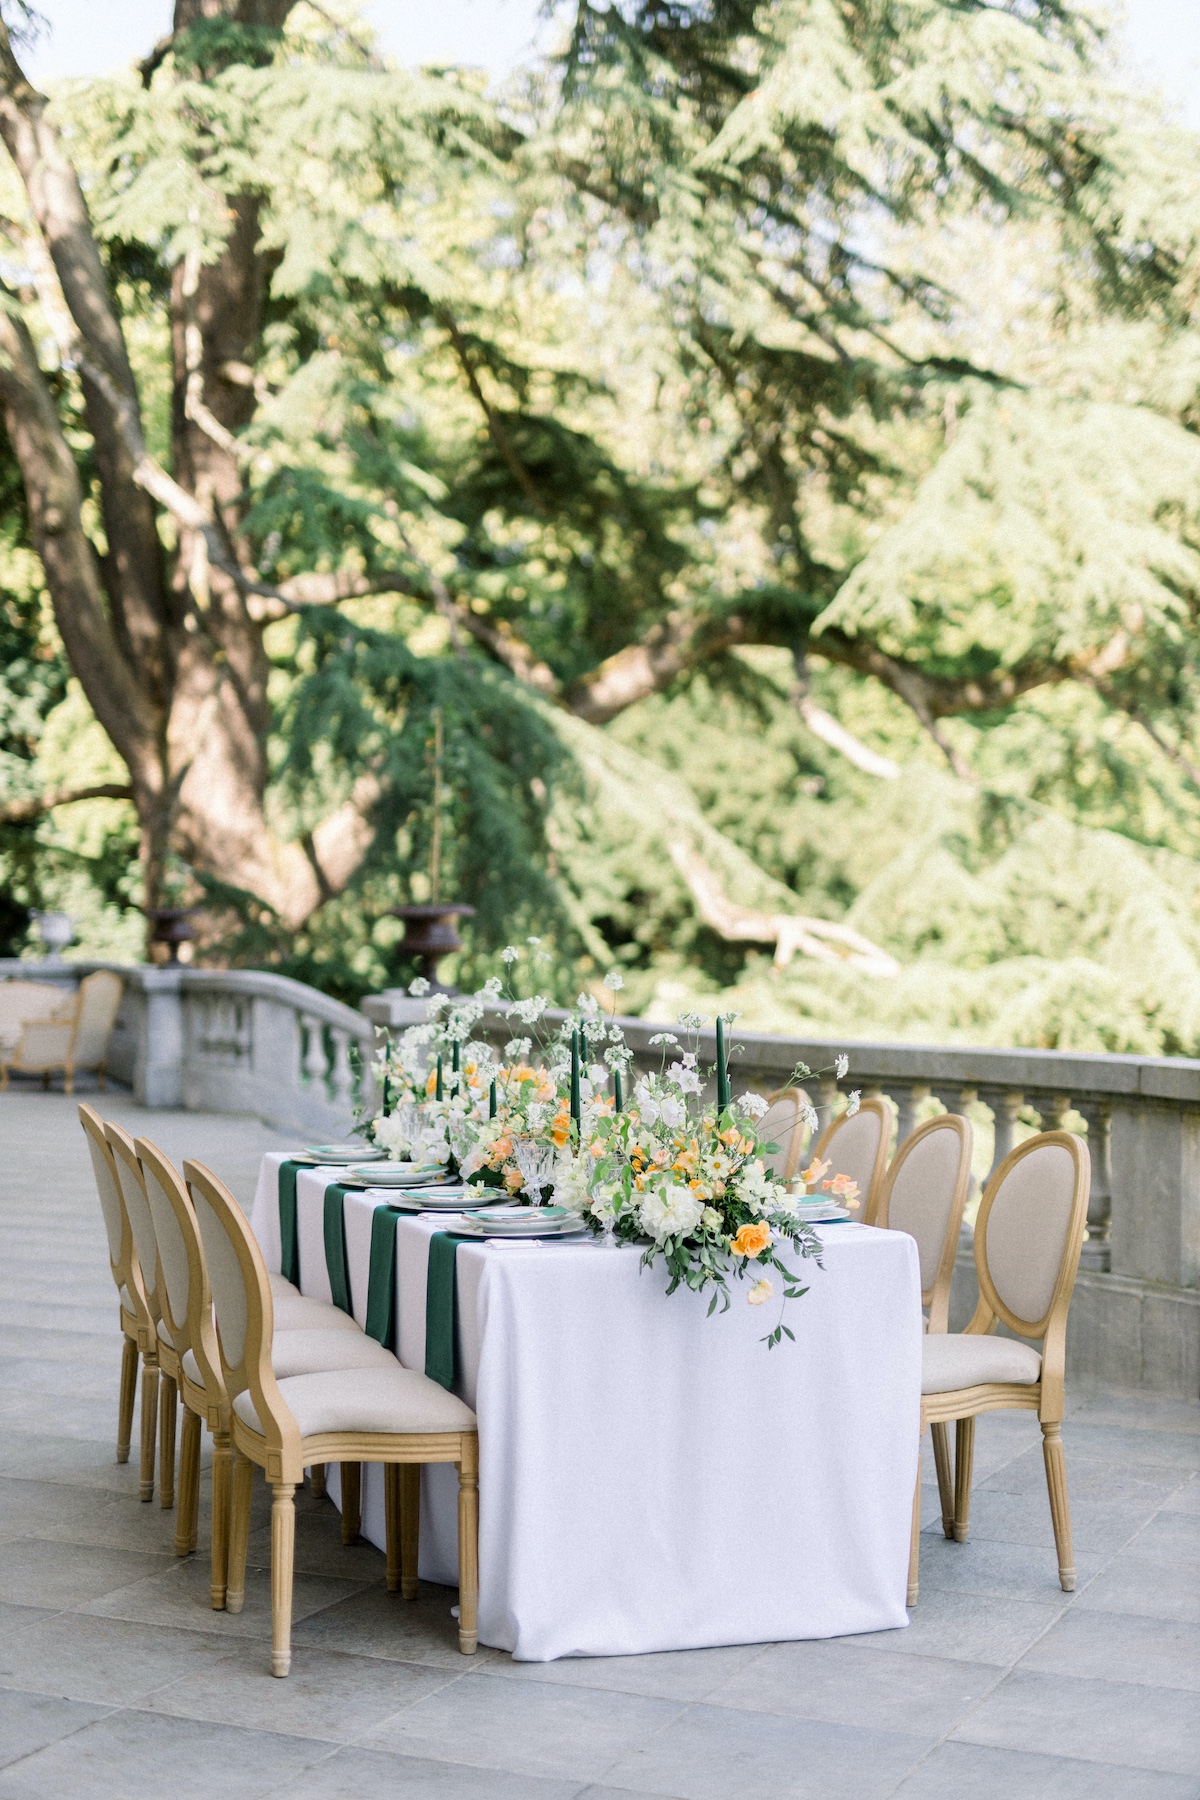 Green Is The Star Of This Elegant Styled Shoot